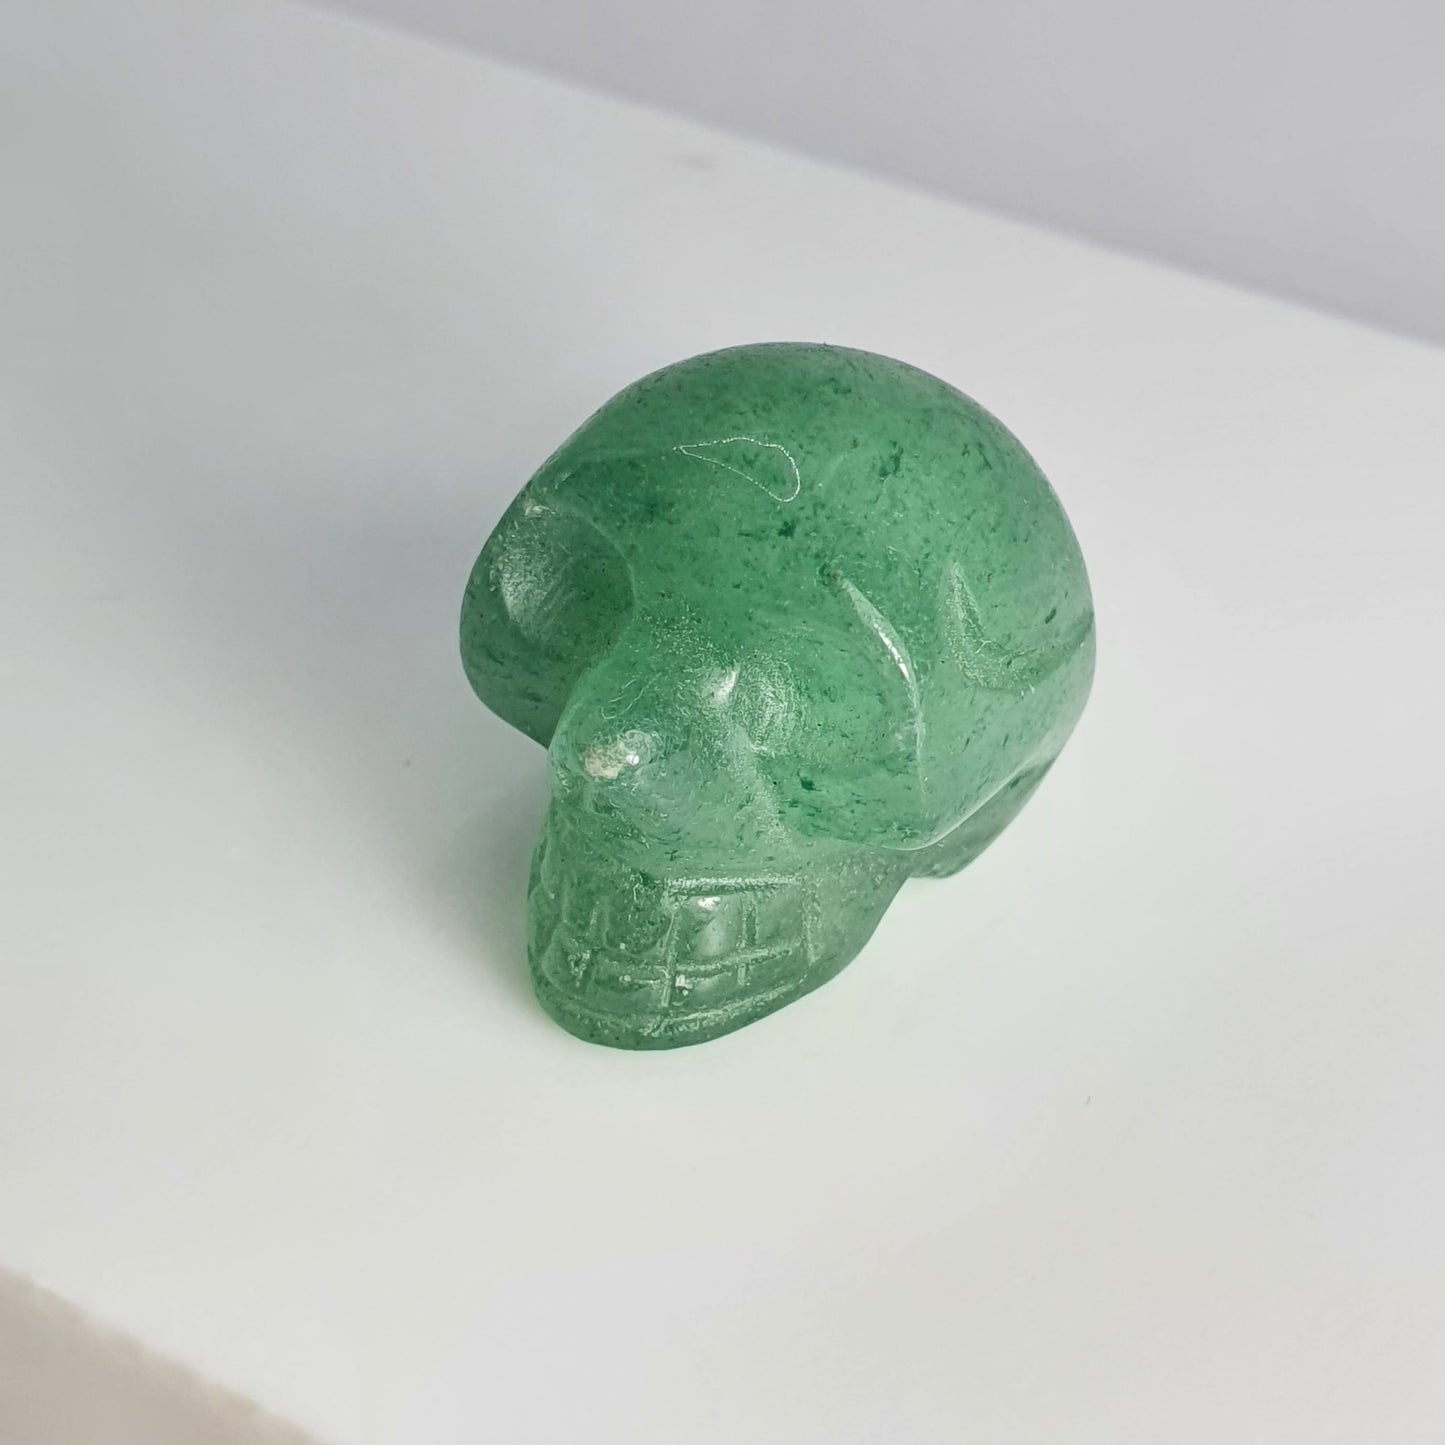 Crystal Skulls | Green Aventurine Skull - LUCK/LOVE | Birthday Gifts, Anniversary Gifts, Valentine's Day, Christmas, Easter, Eid, Mother's Day, Diwali, Hannukah, Women's, Girl's, Gifts for her, Gifts for Girlfriend, Gifts for Mom, Gifts for Mum, Gifts for Friend, Handmade Gifts, Handmade Jewelry, New Year's Eve, Graduation, Boho, Hippie, Minimalist, Gemstone, Crystal, Crystal Healing